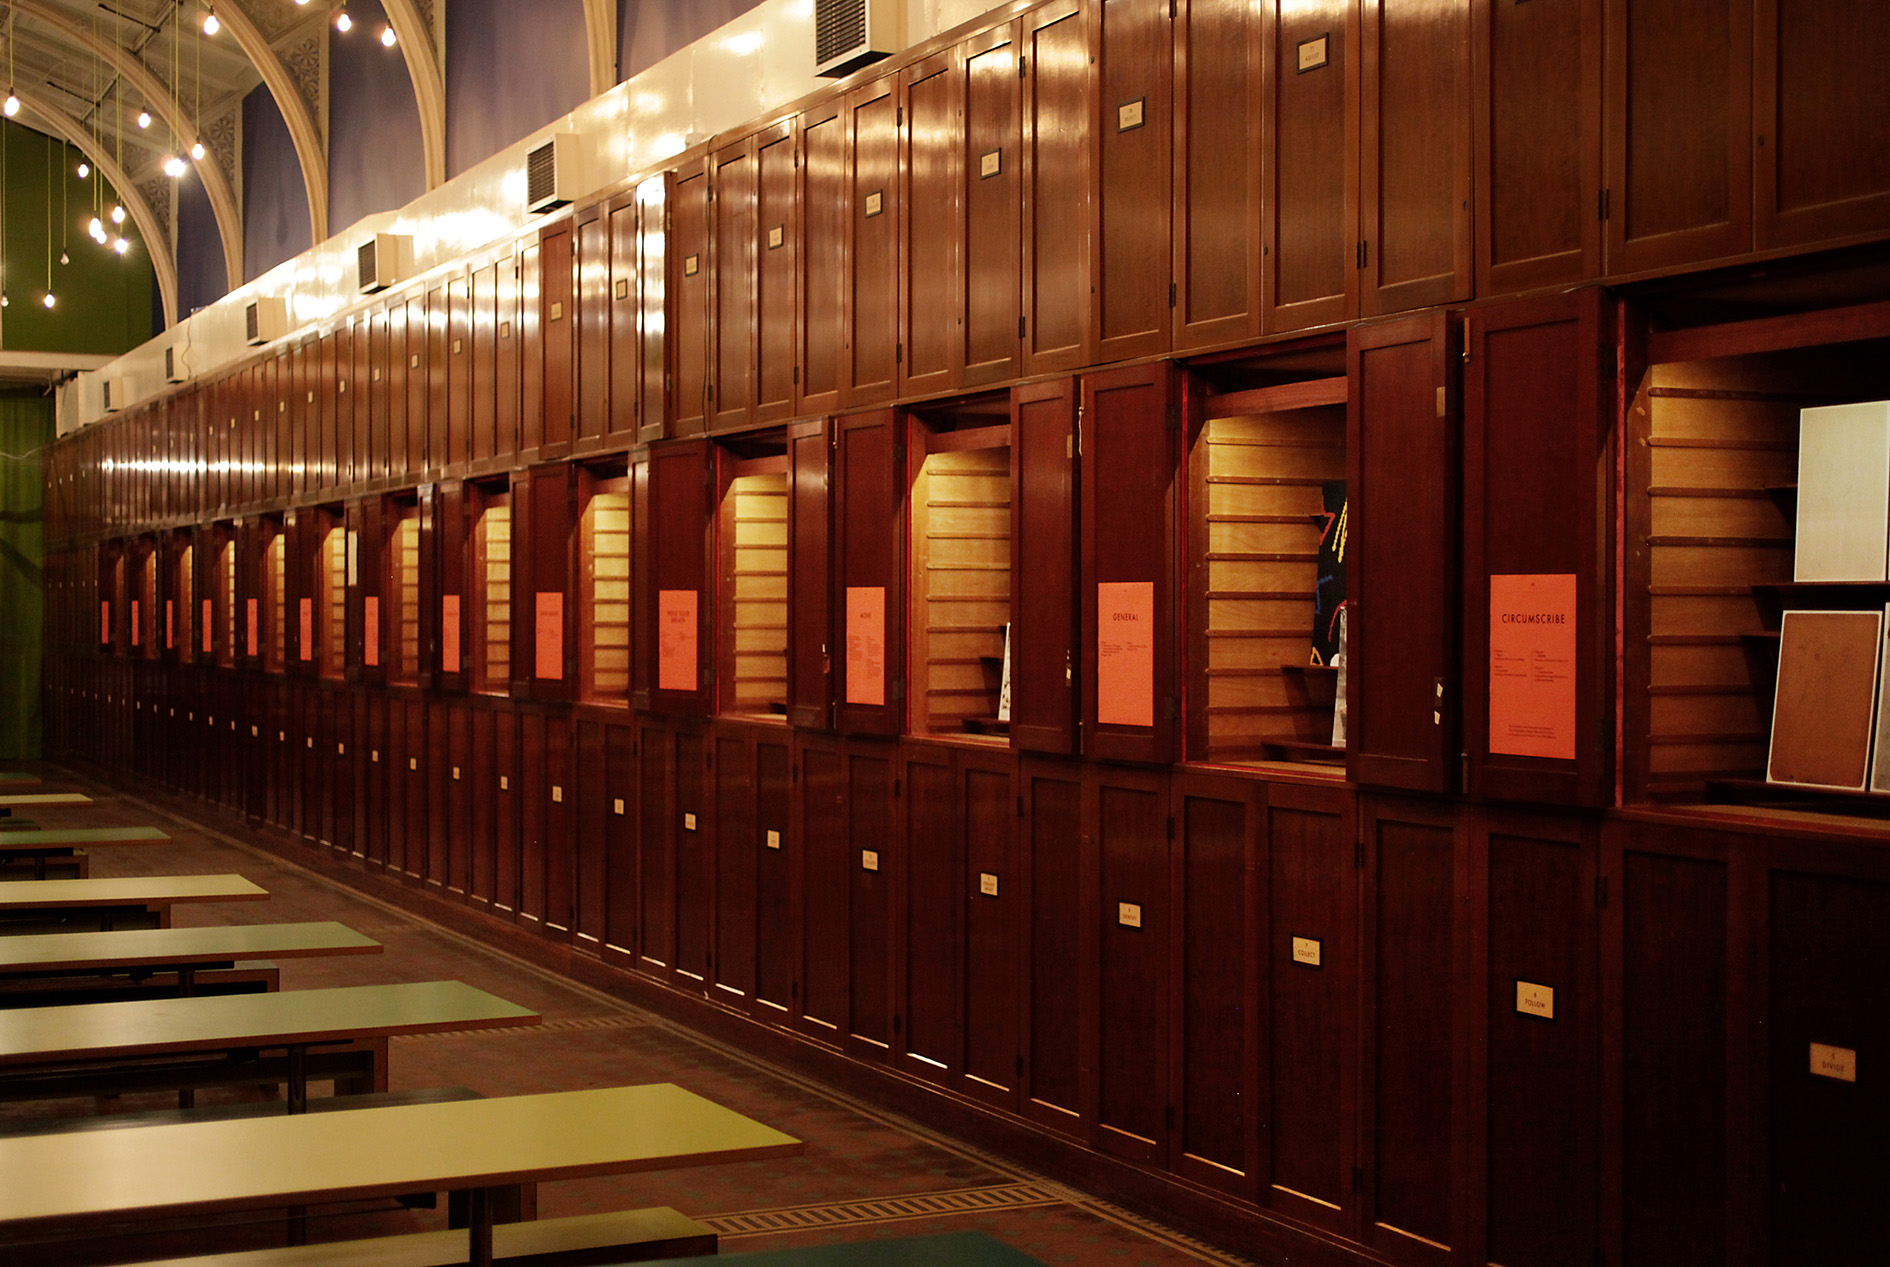 The Cabinets in the V&A lunchroom